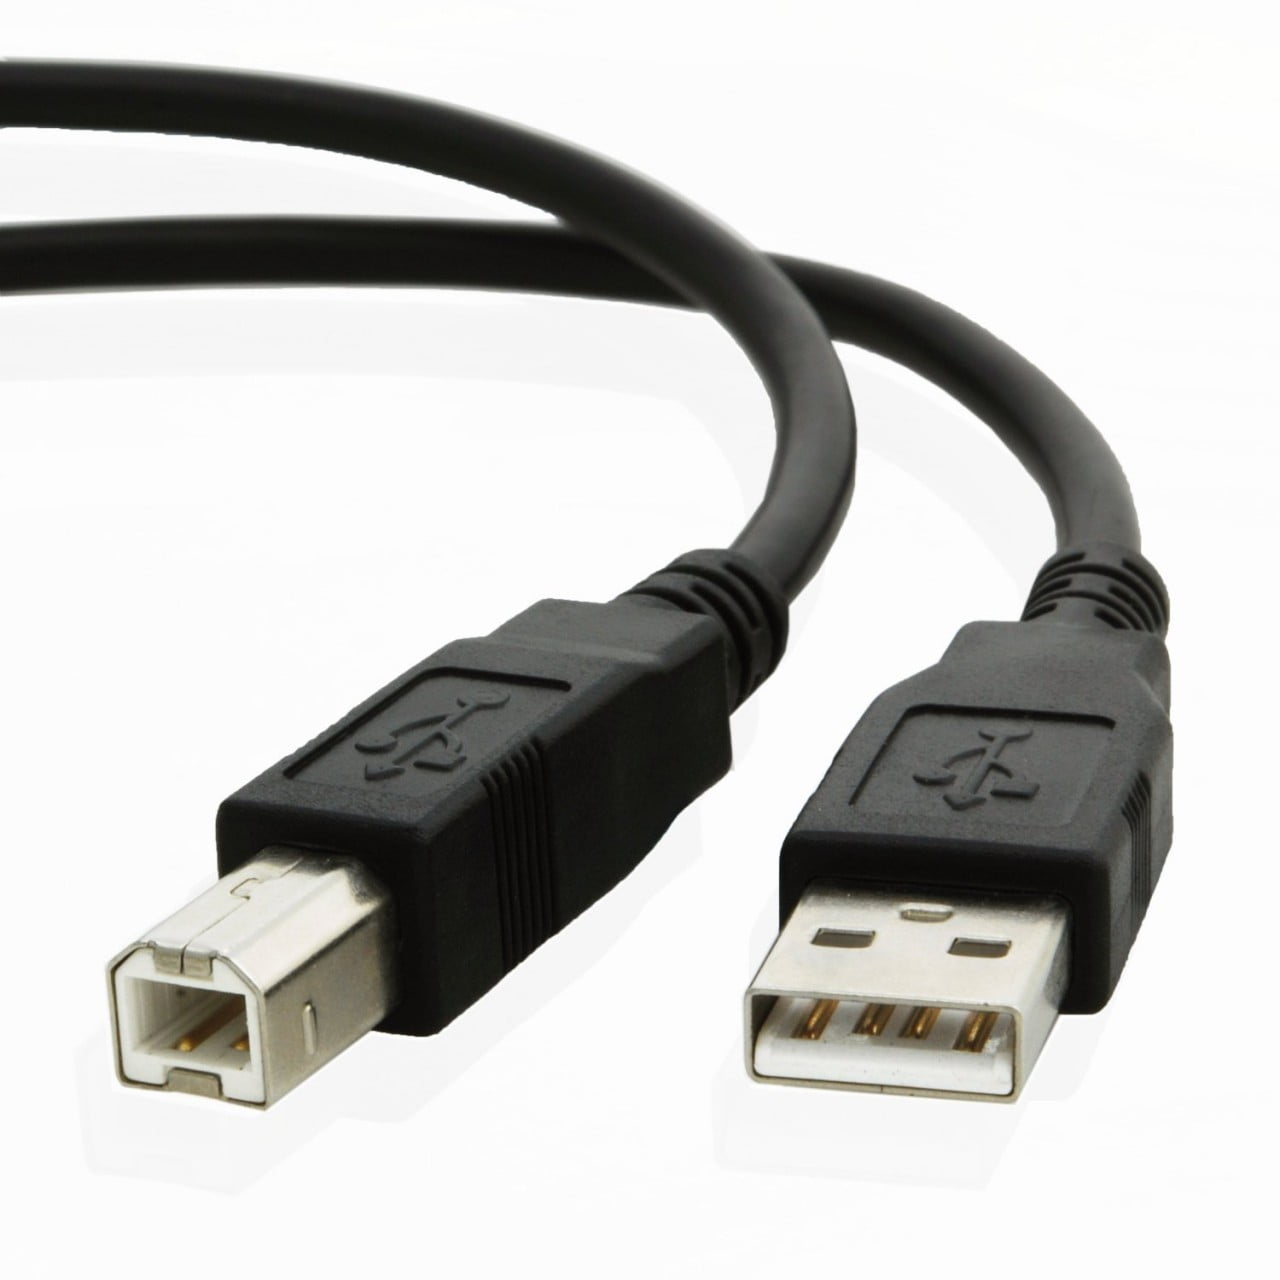 6ft USB Cable for: DYMO Label Writer 450 Twin Turbo label printer, 71  Labels Per Minute, Black/Silver (1752266)